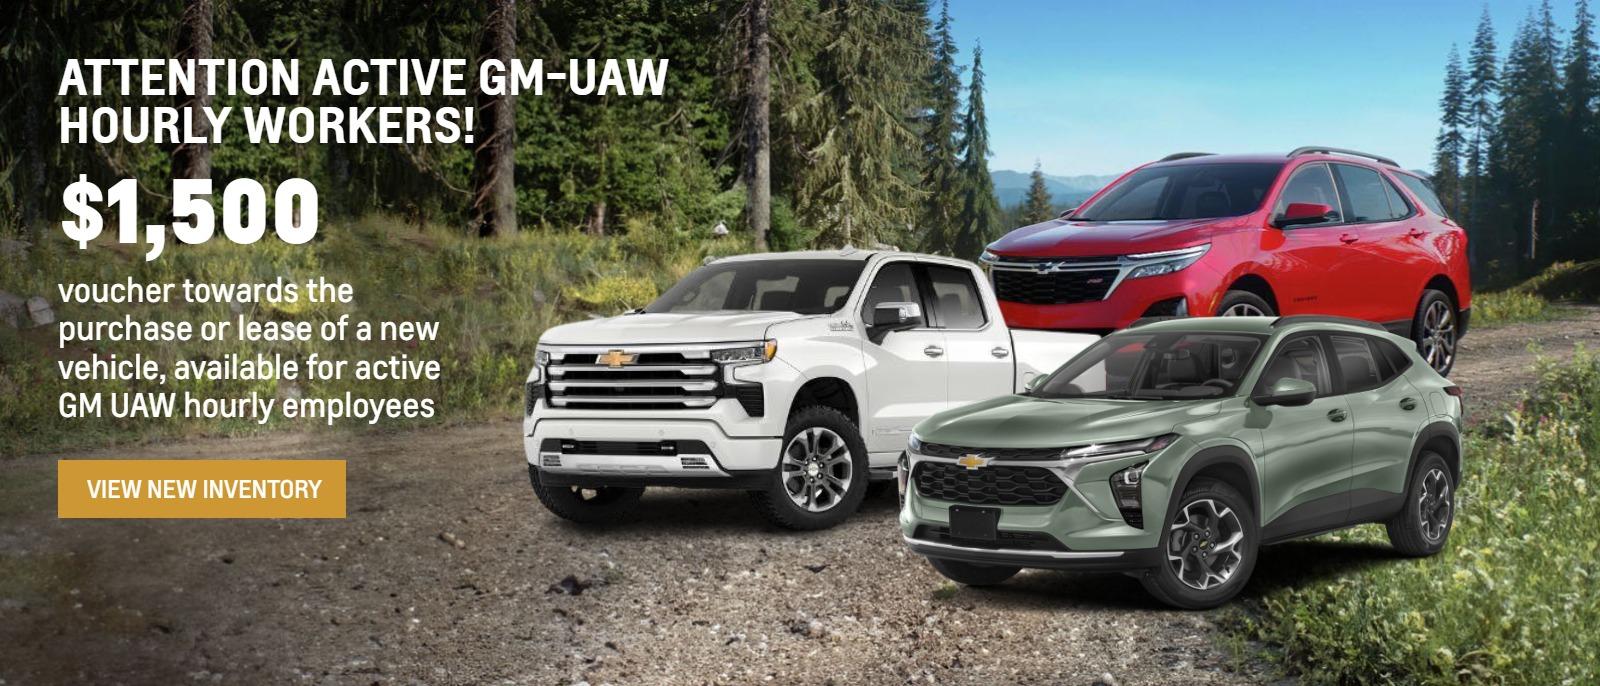 Attention Active GM-UAW Hourly Workers!
 $1,500 voucher towards the purchase or lease of a new vehicle, available for active GM UAW hourly employees